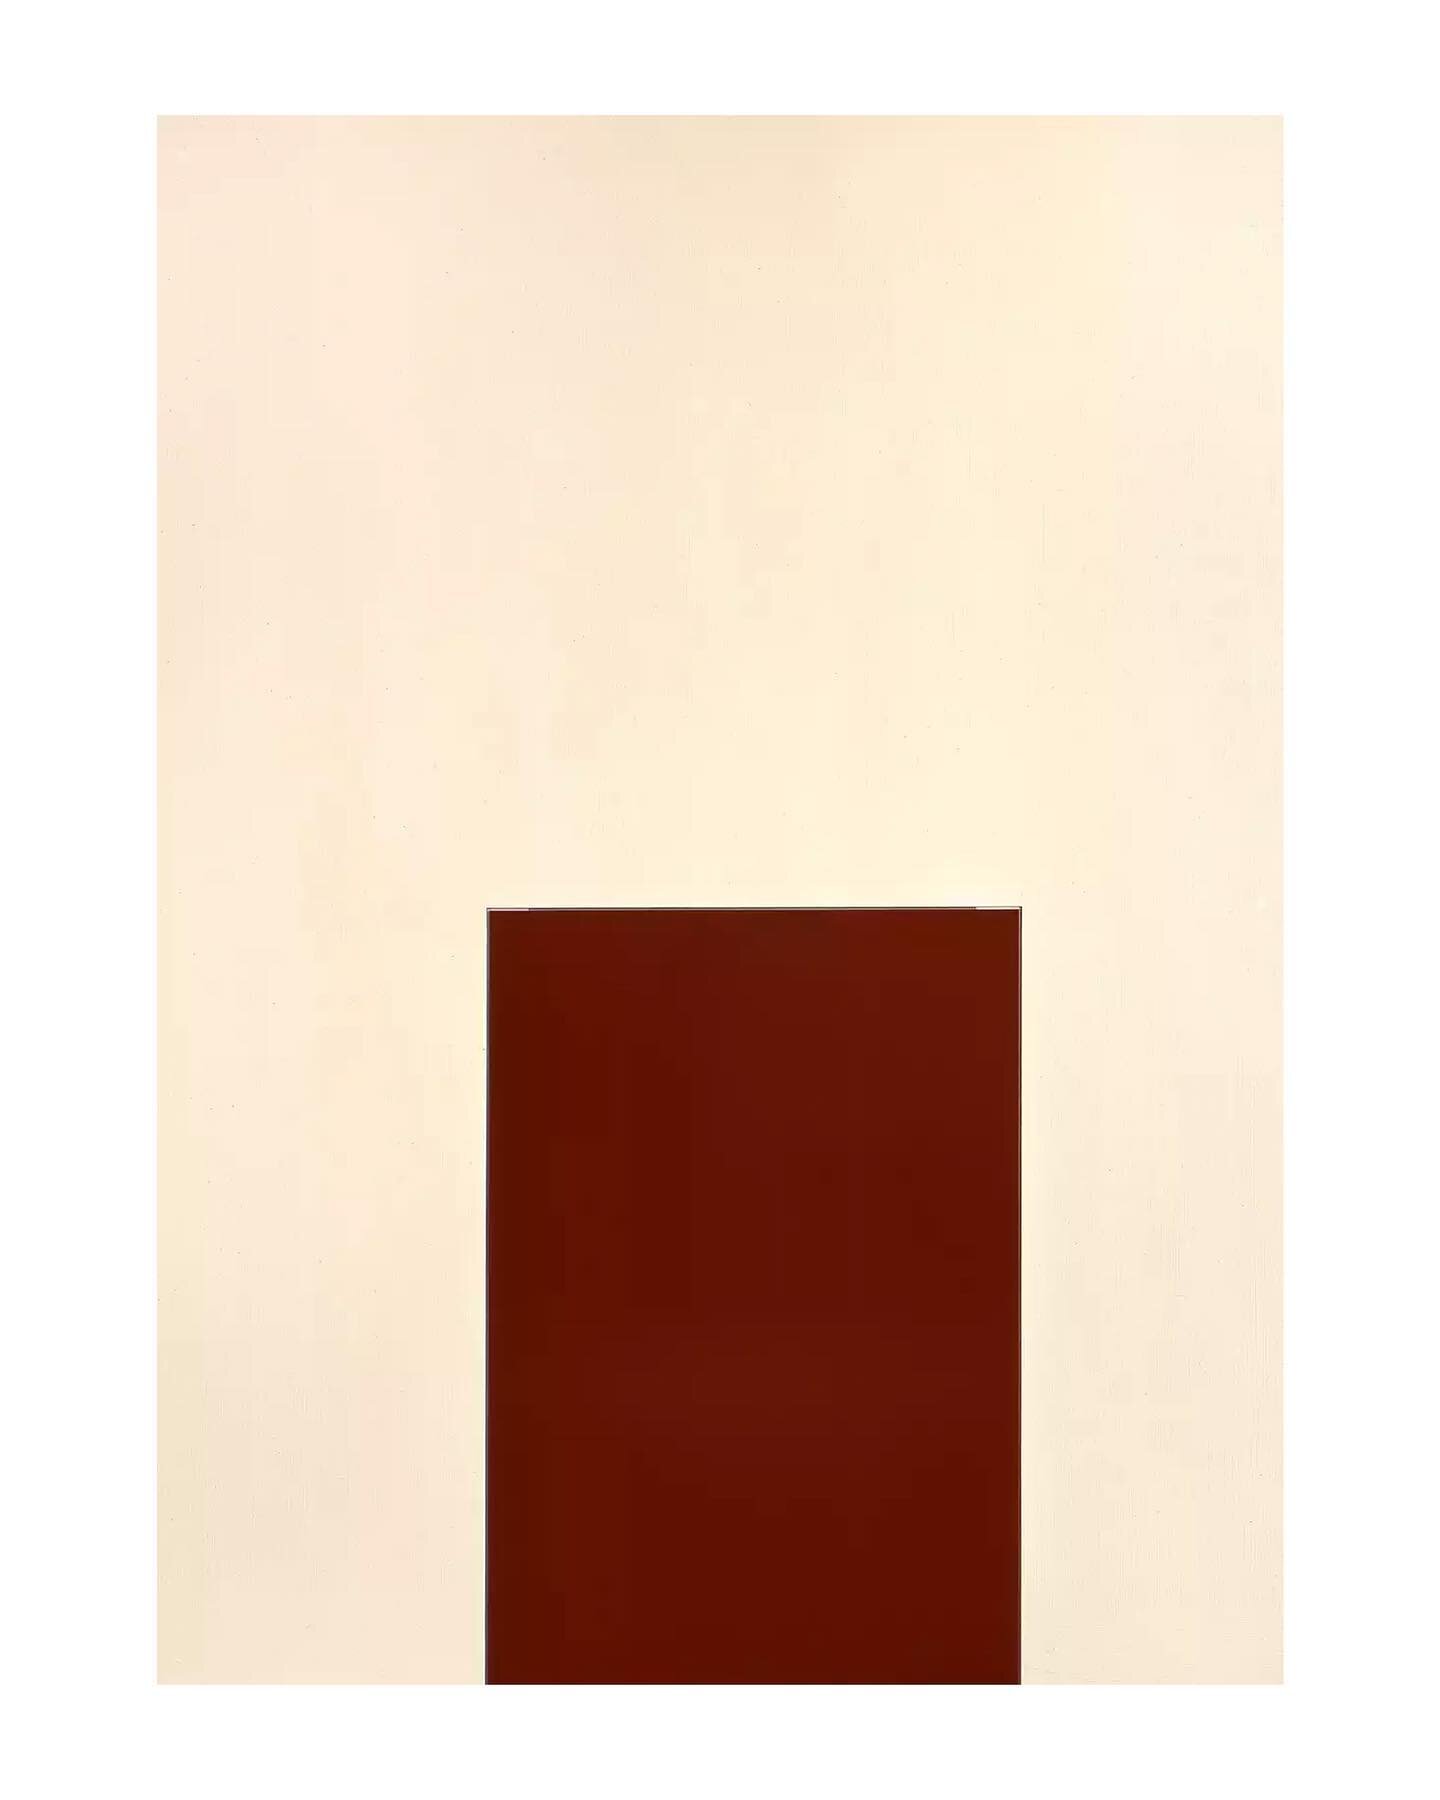 Color Reference: Imi Knoebel, &bdquo;Pure Freude 5&ldquo;, 2001

Imi Knoebel, born Klaus Wolf Knoebel on December 31, 1940, in Dessau, Germany, is a celebrated German artist known for his contributions to minimalism and abstract art.

Knoebel's art c